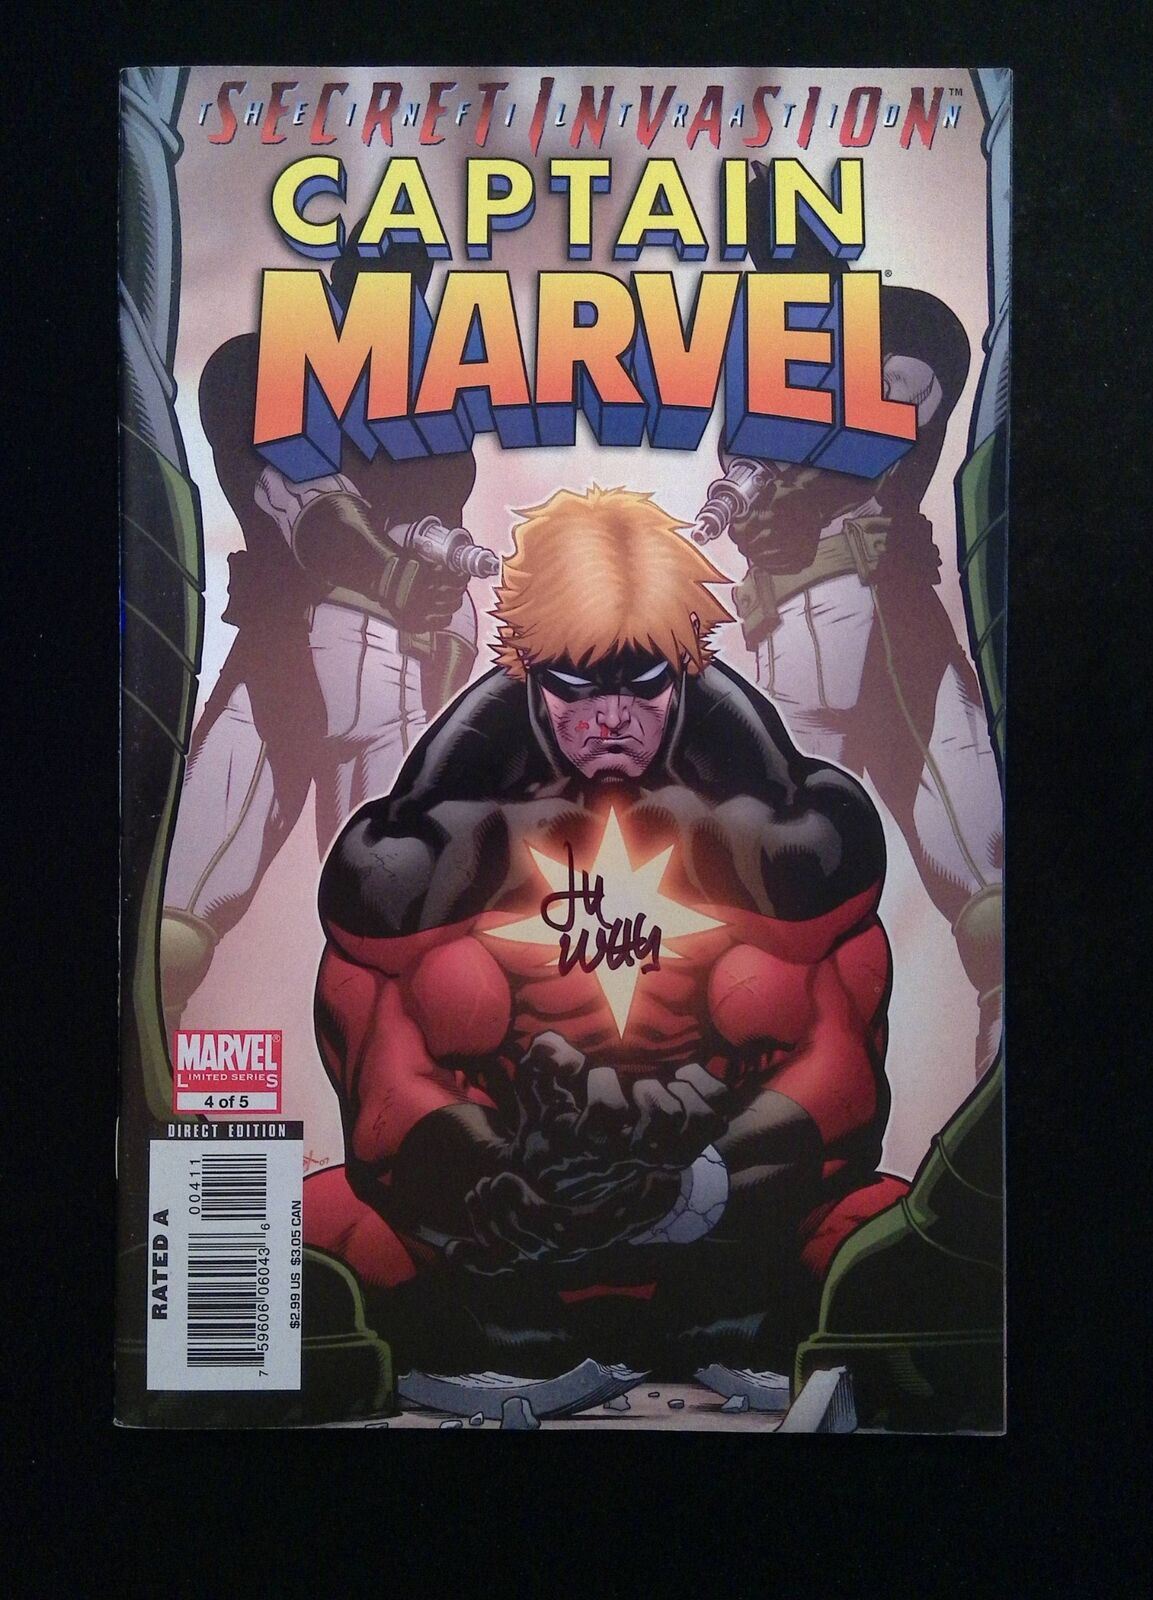 Captain Marvel #4 (6TH SERIES) MARVEL Comics 2008 VF+  SIGNED BY LEE WEEKS